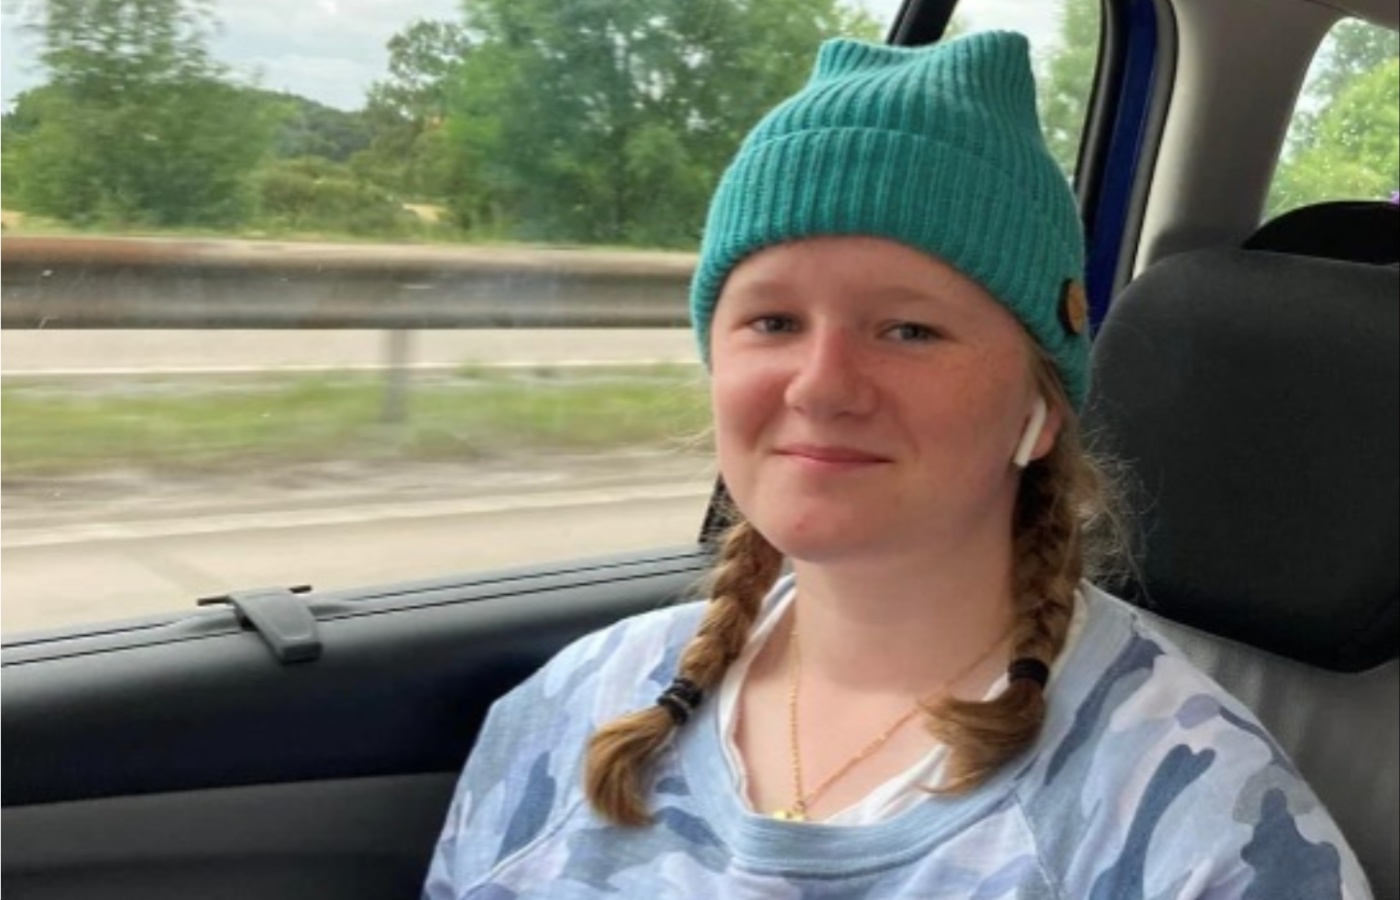 Jessica Baker, aged 15, was killed when the bus crashed on the M53.